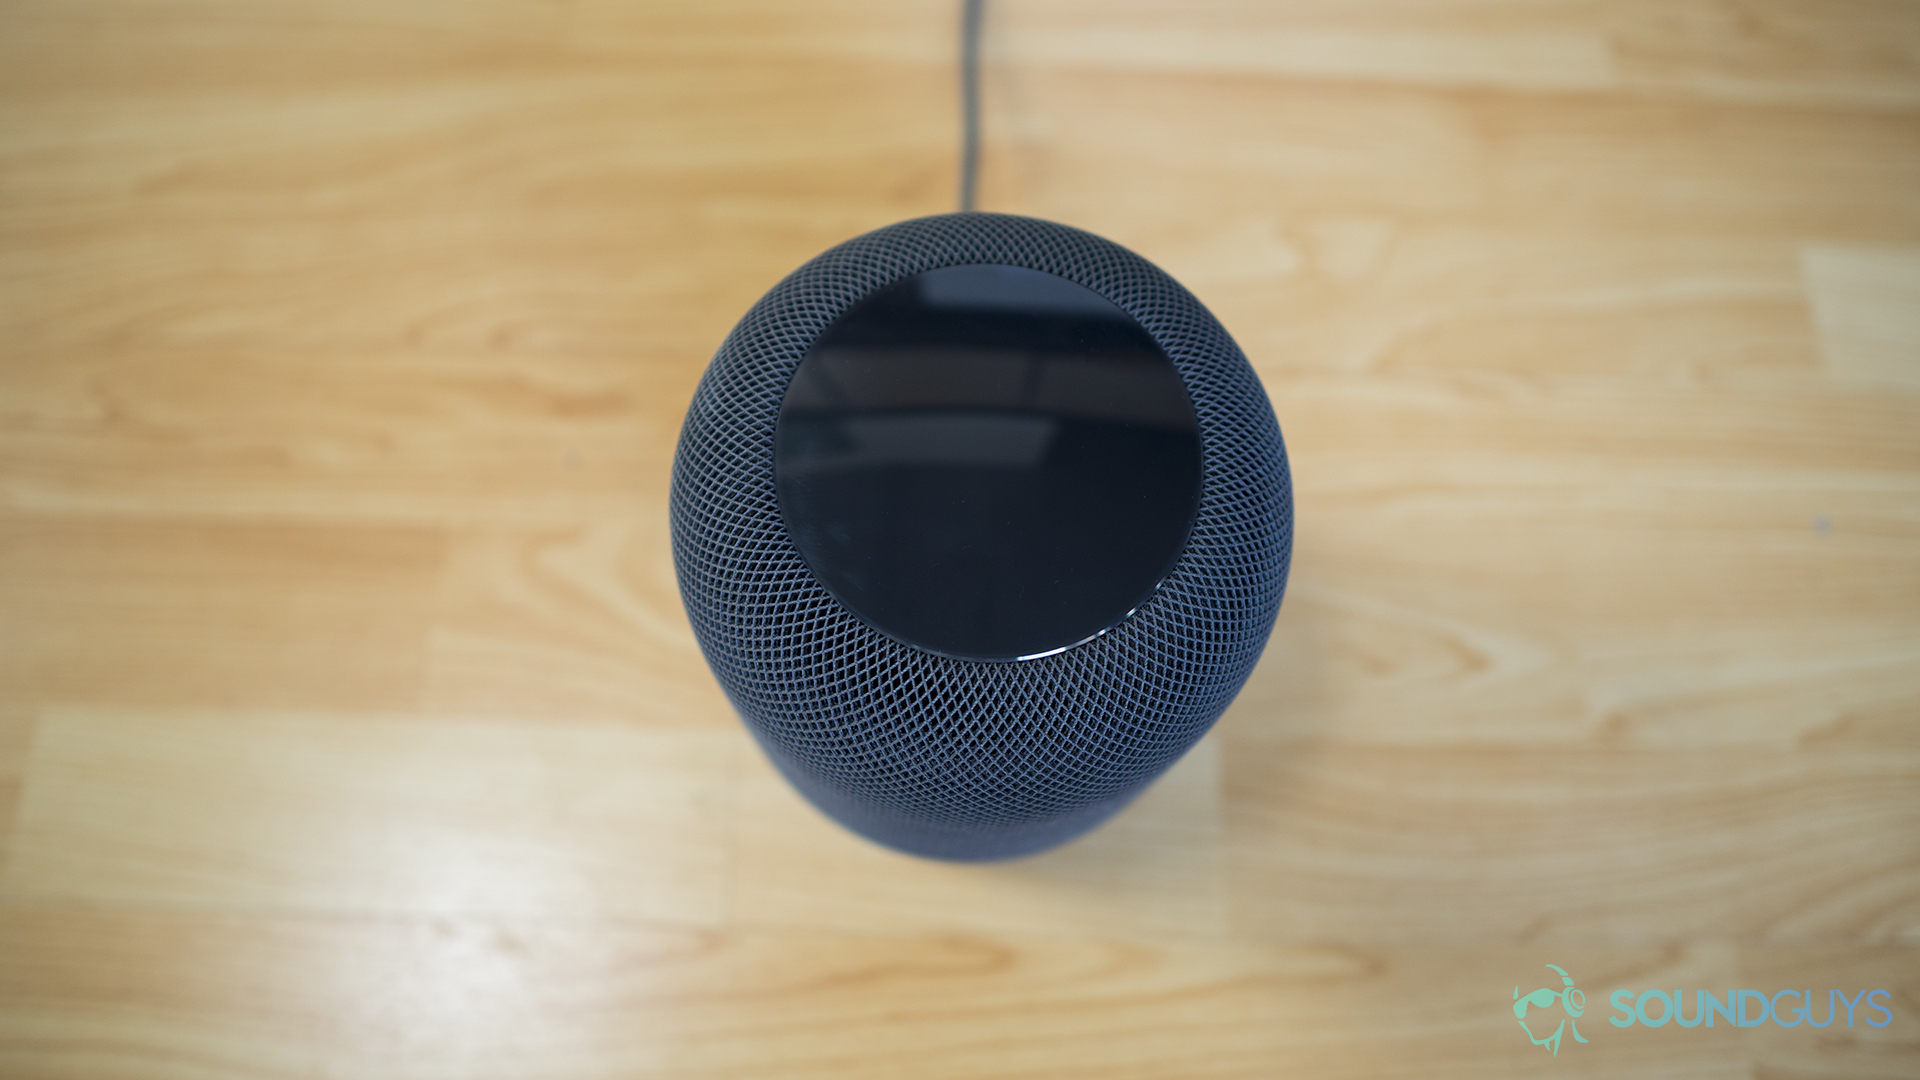 A photo of an Apple HomePod sitting on a wooden table.